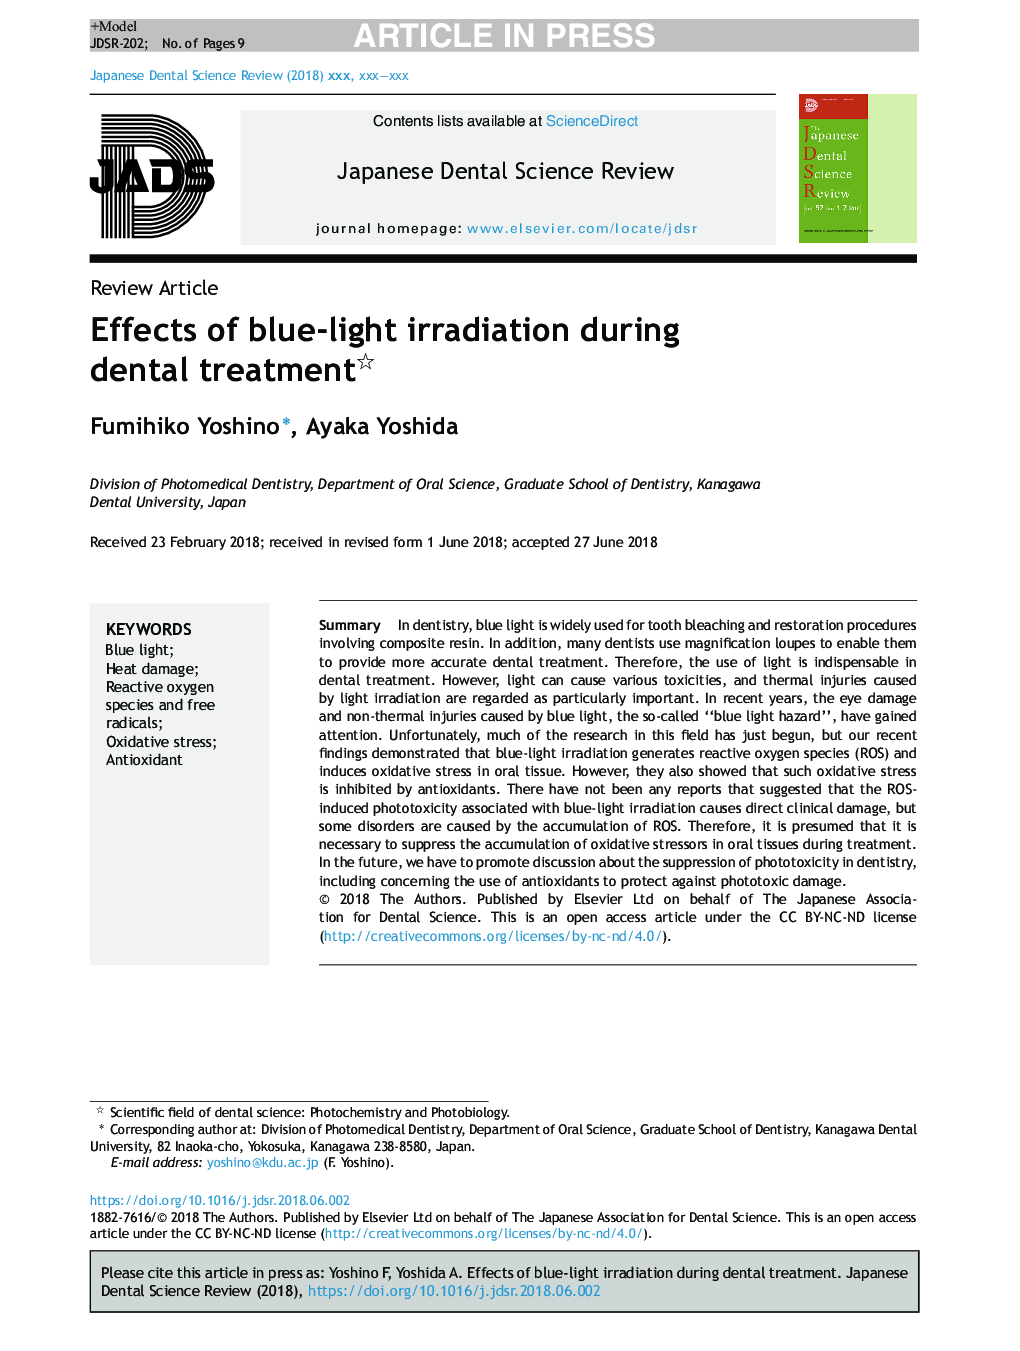 Effects of blue-light irradiation during dental treatment